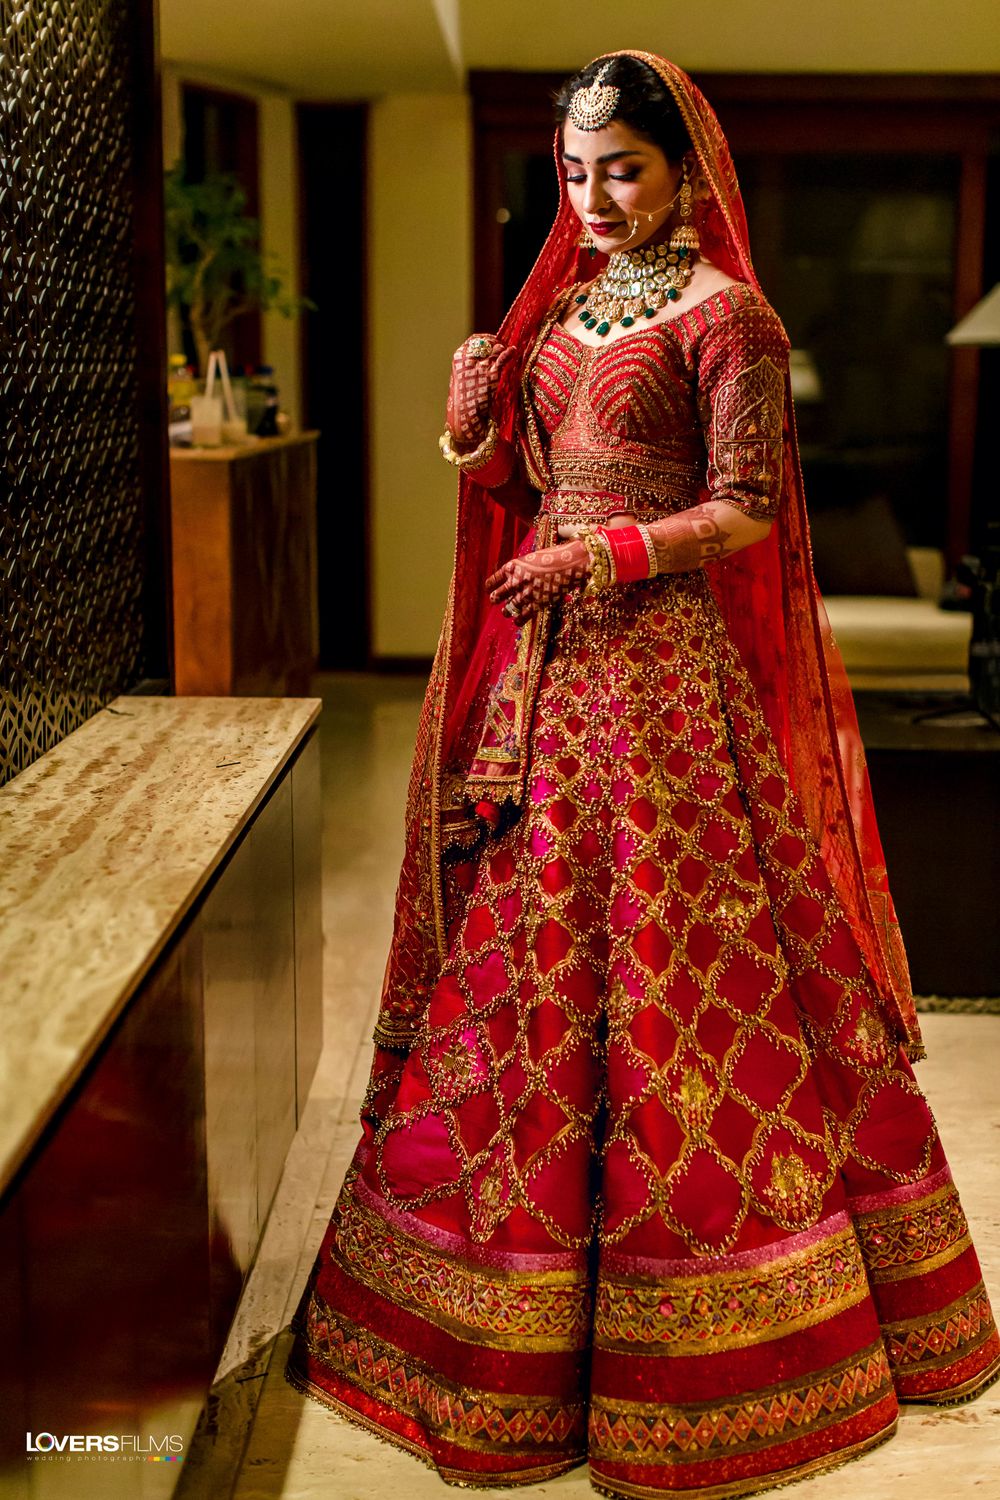 Photo of red modern bridal lehenga with gold work